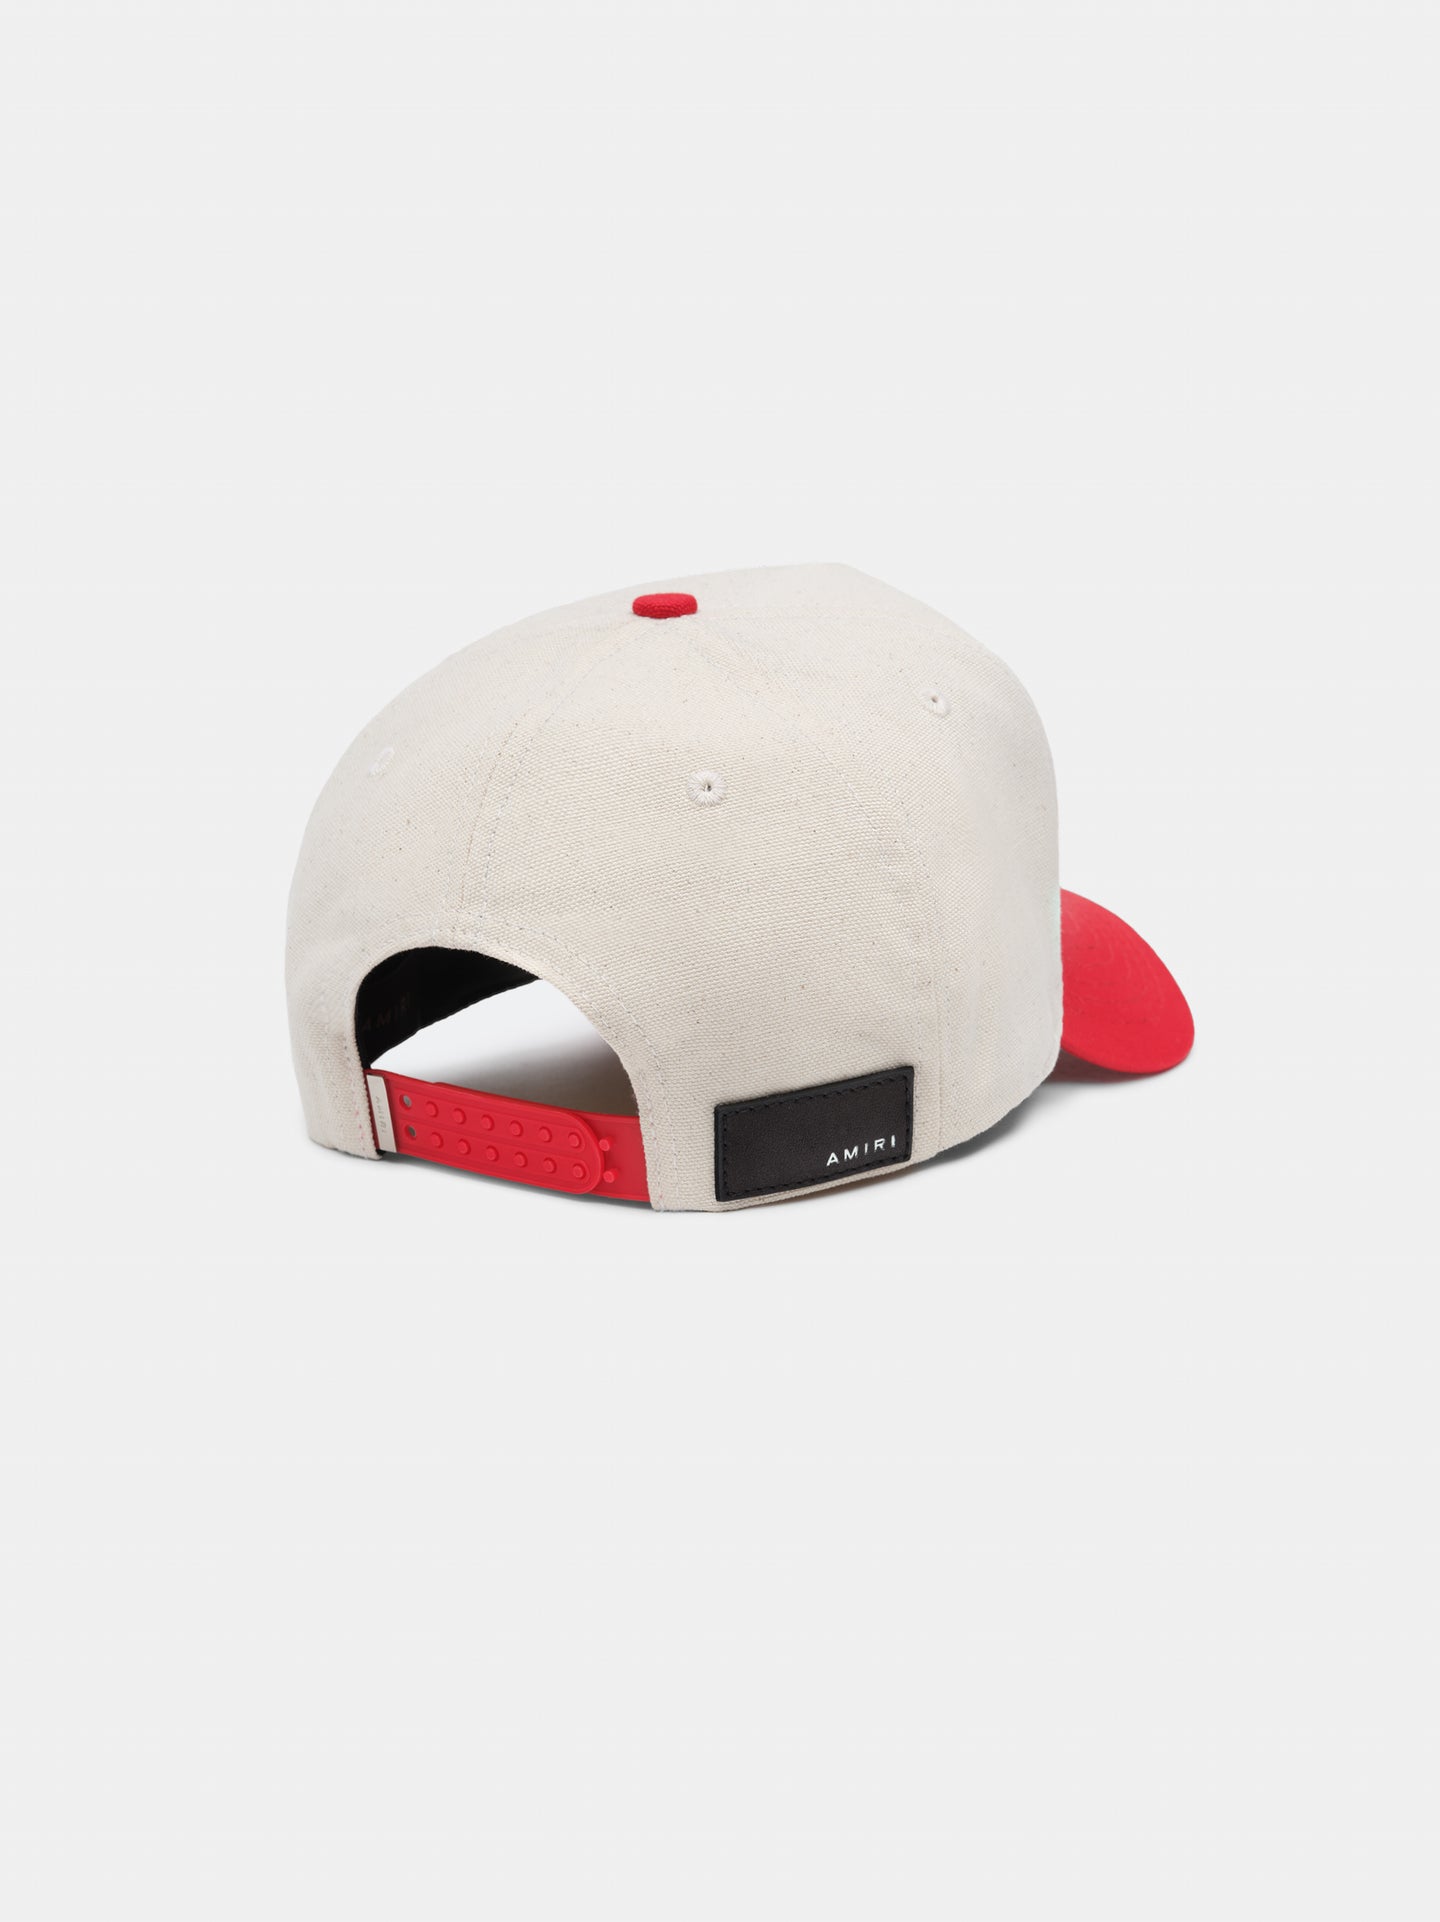 MA CANVAS HAT - Alabaster Red